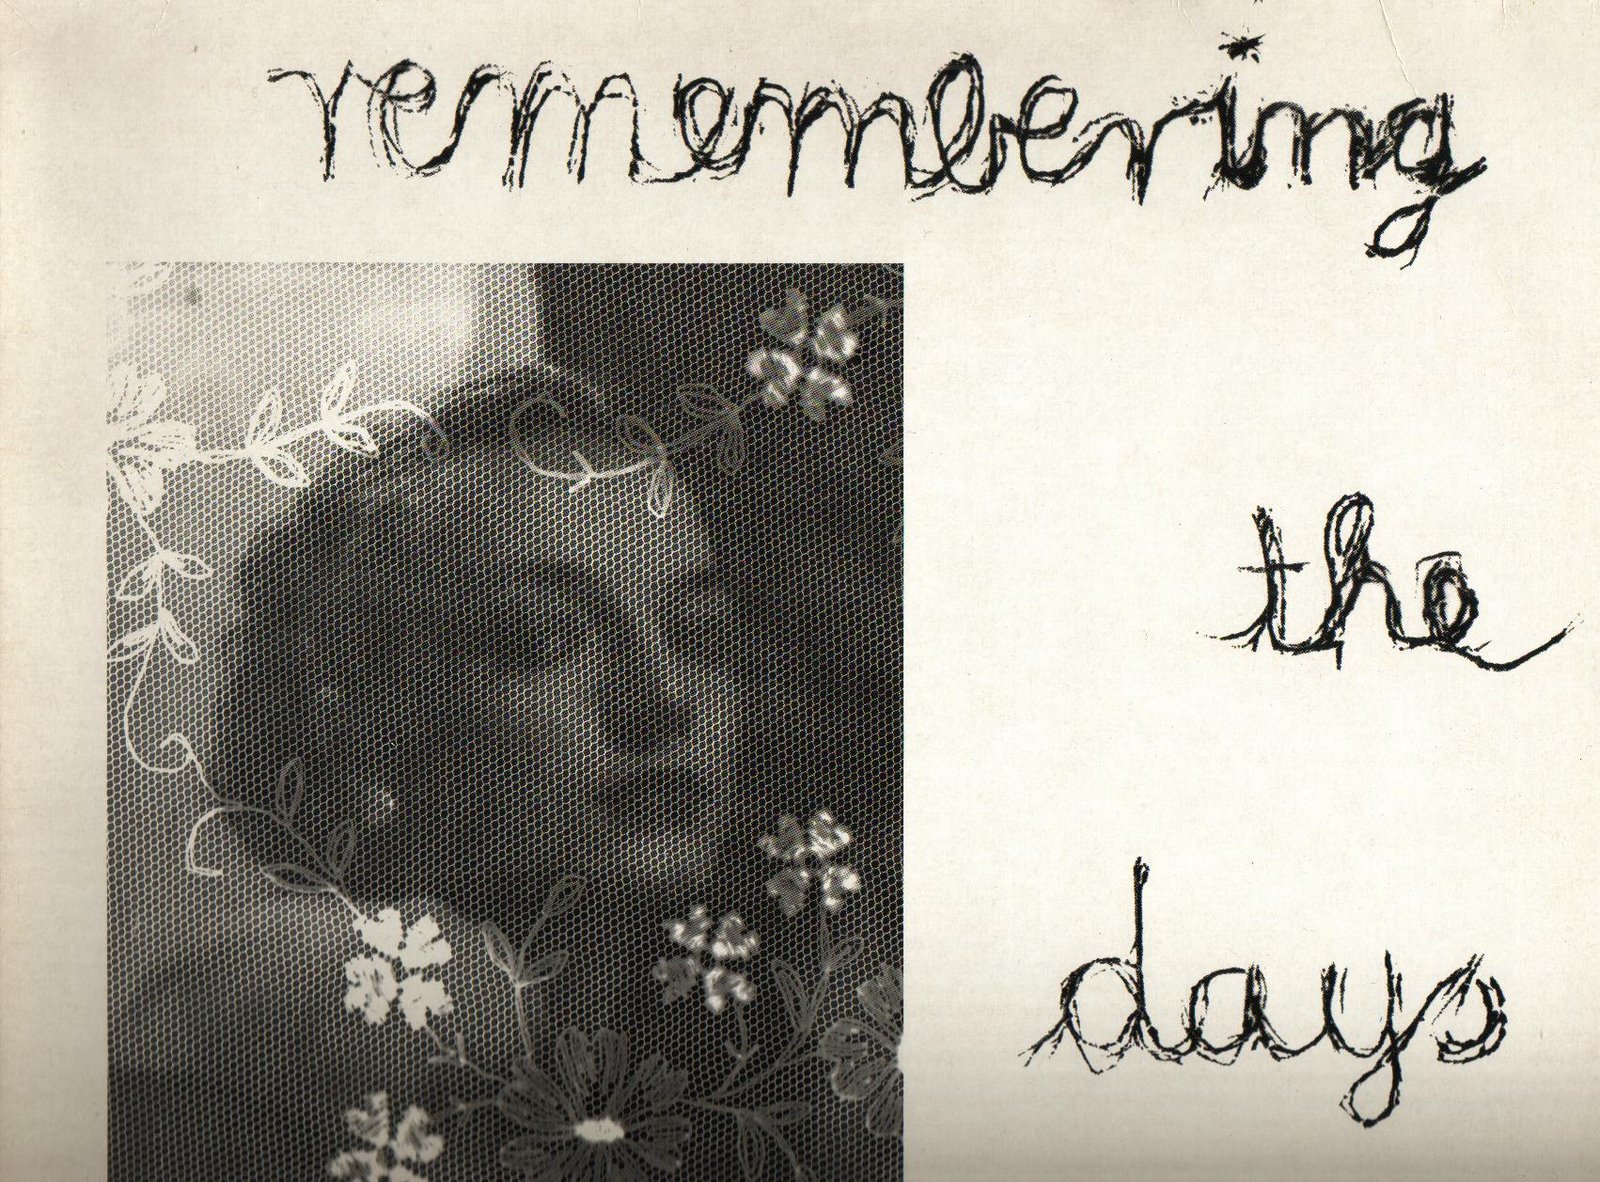 [remembering+the+days+cover.jpg]